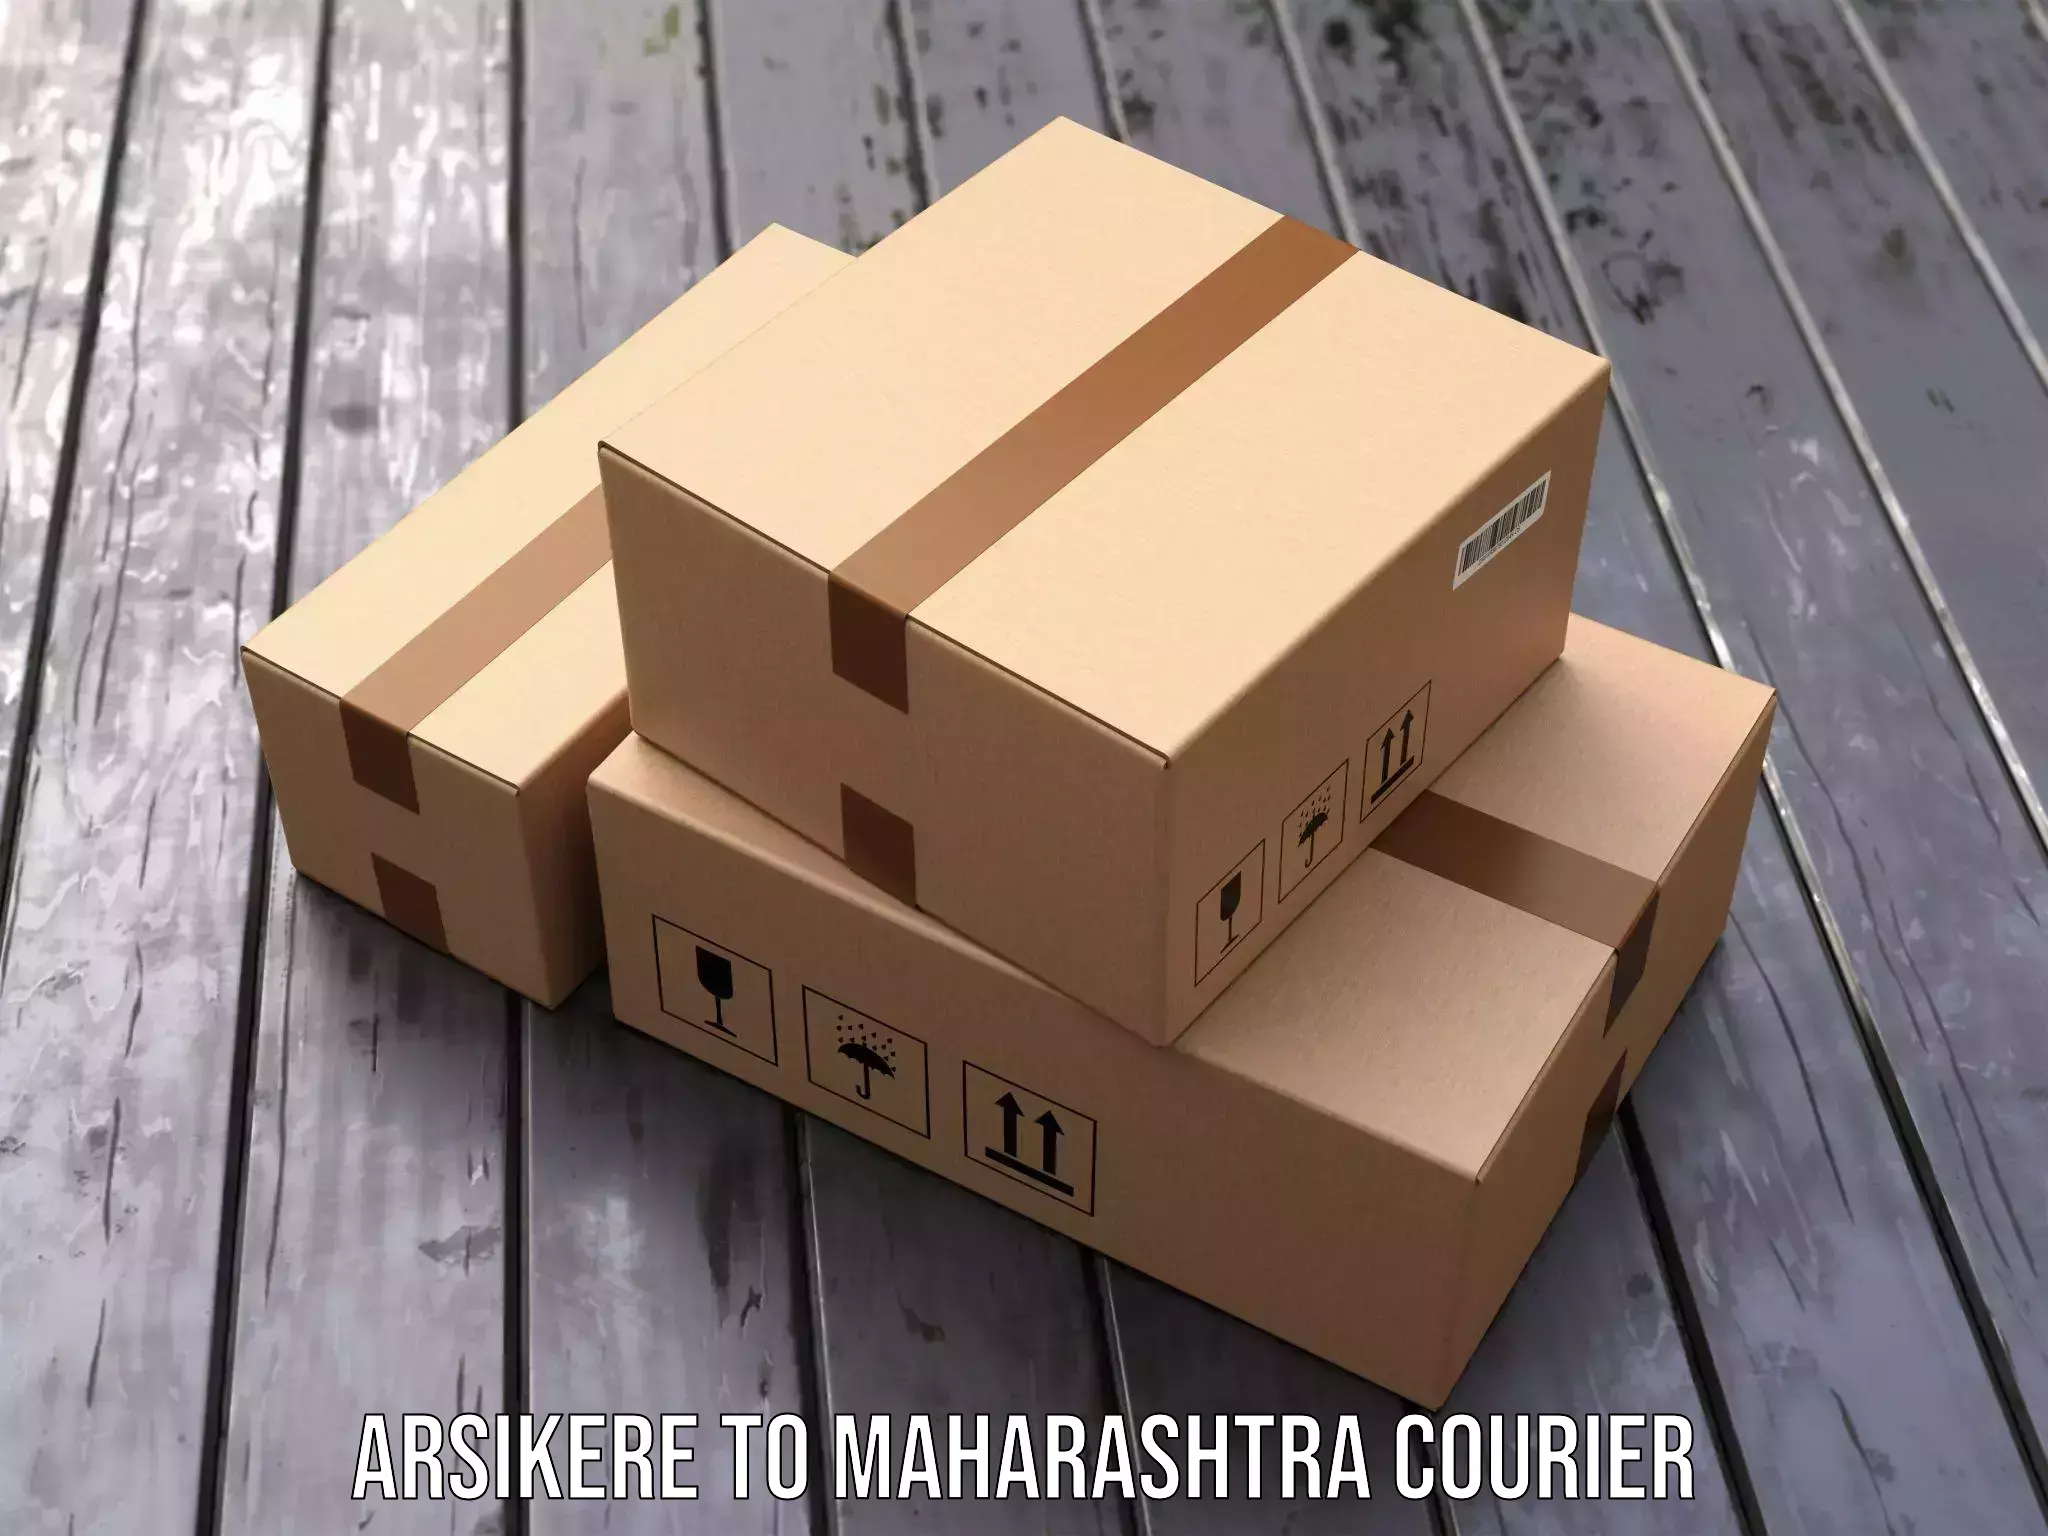 On-demand courier Arsikere to Maharashtra